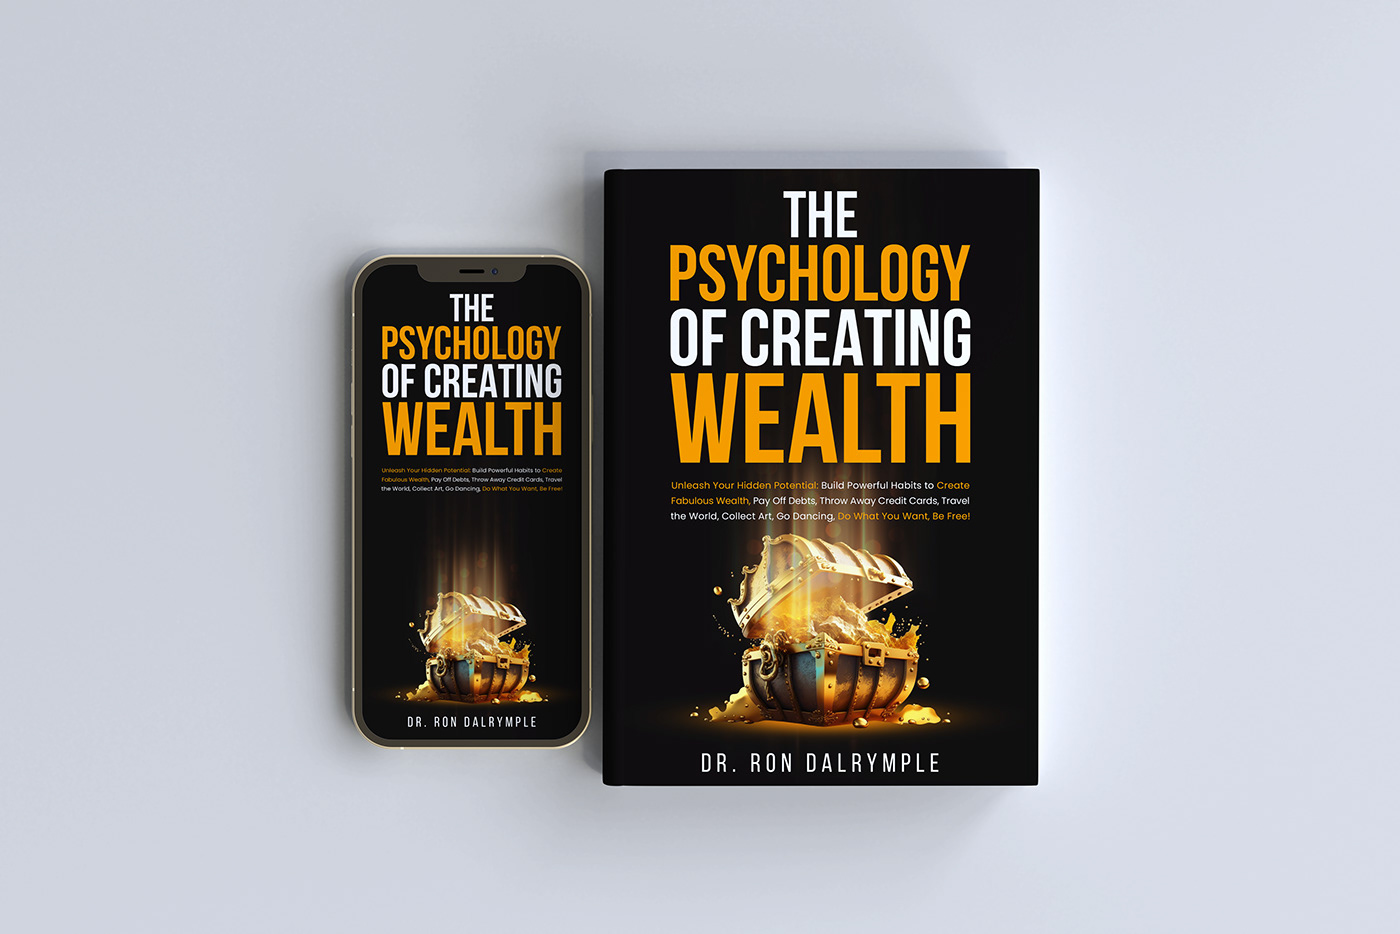 book cover Book Cover Design book covers business wealth book cover art book cover illustration book design book designer book designs